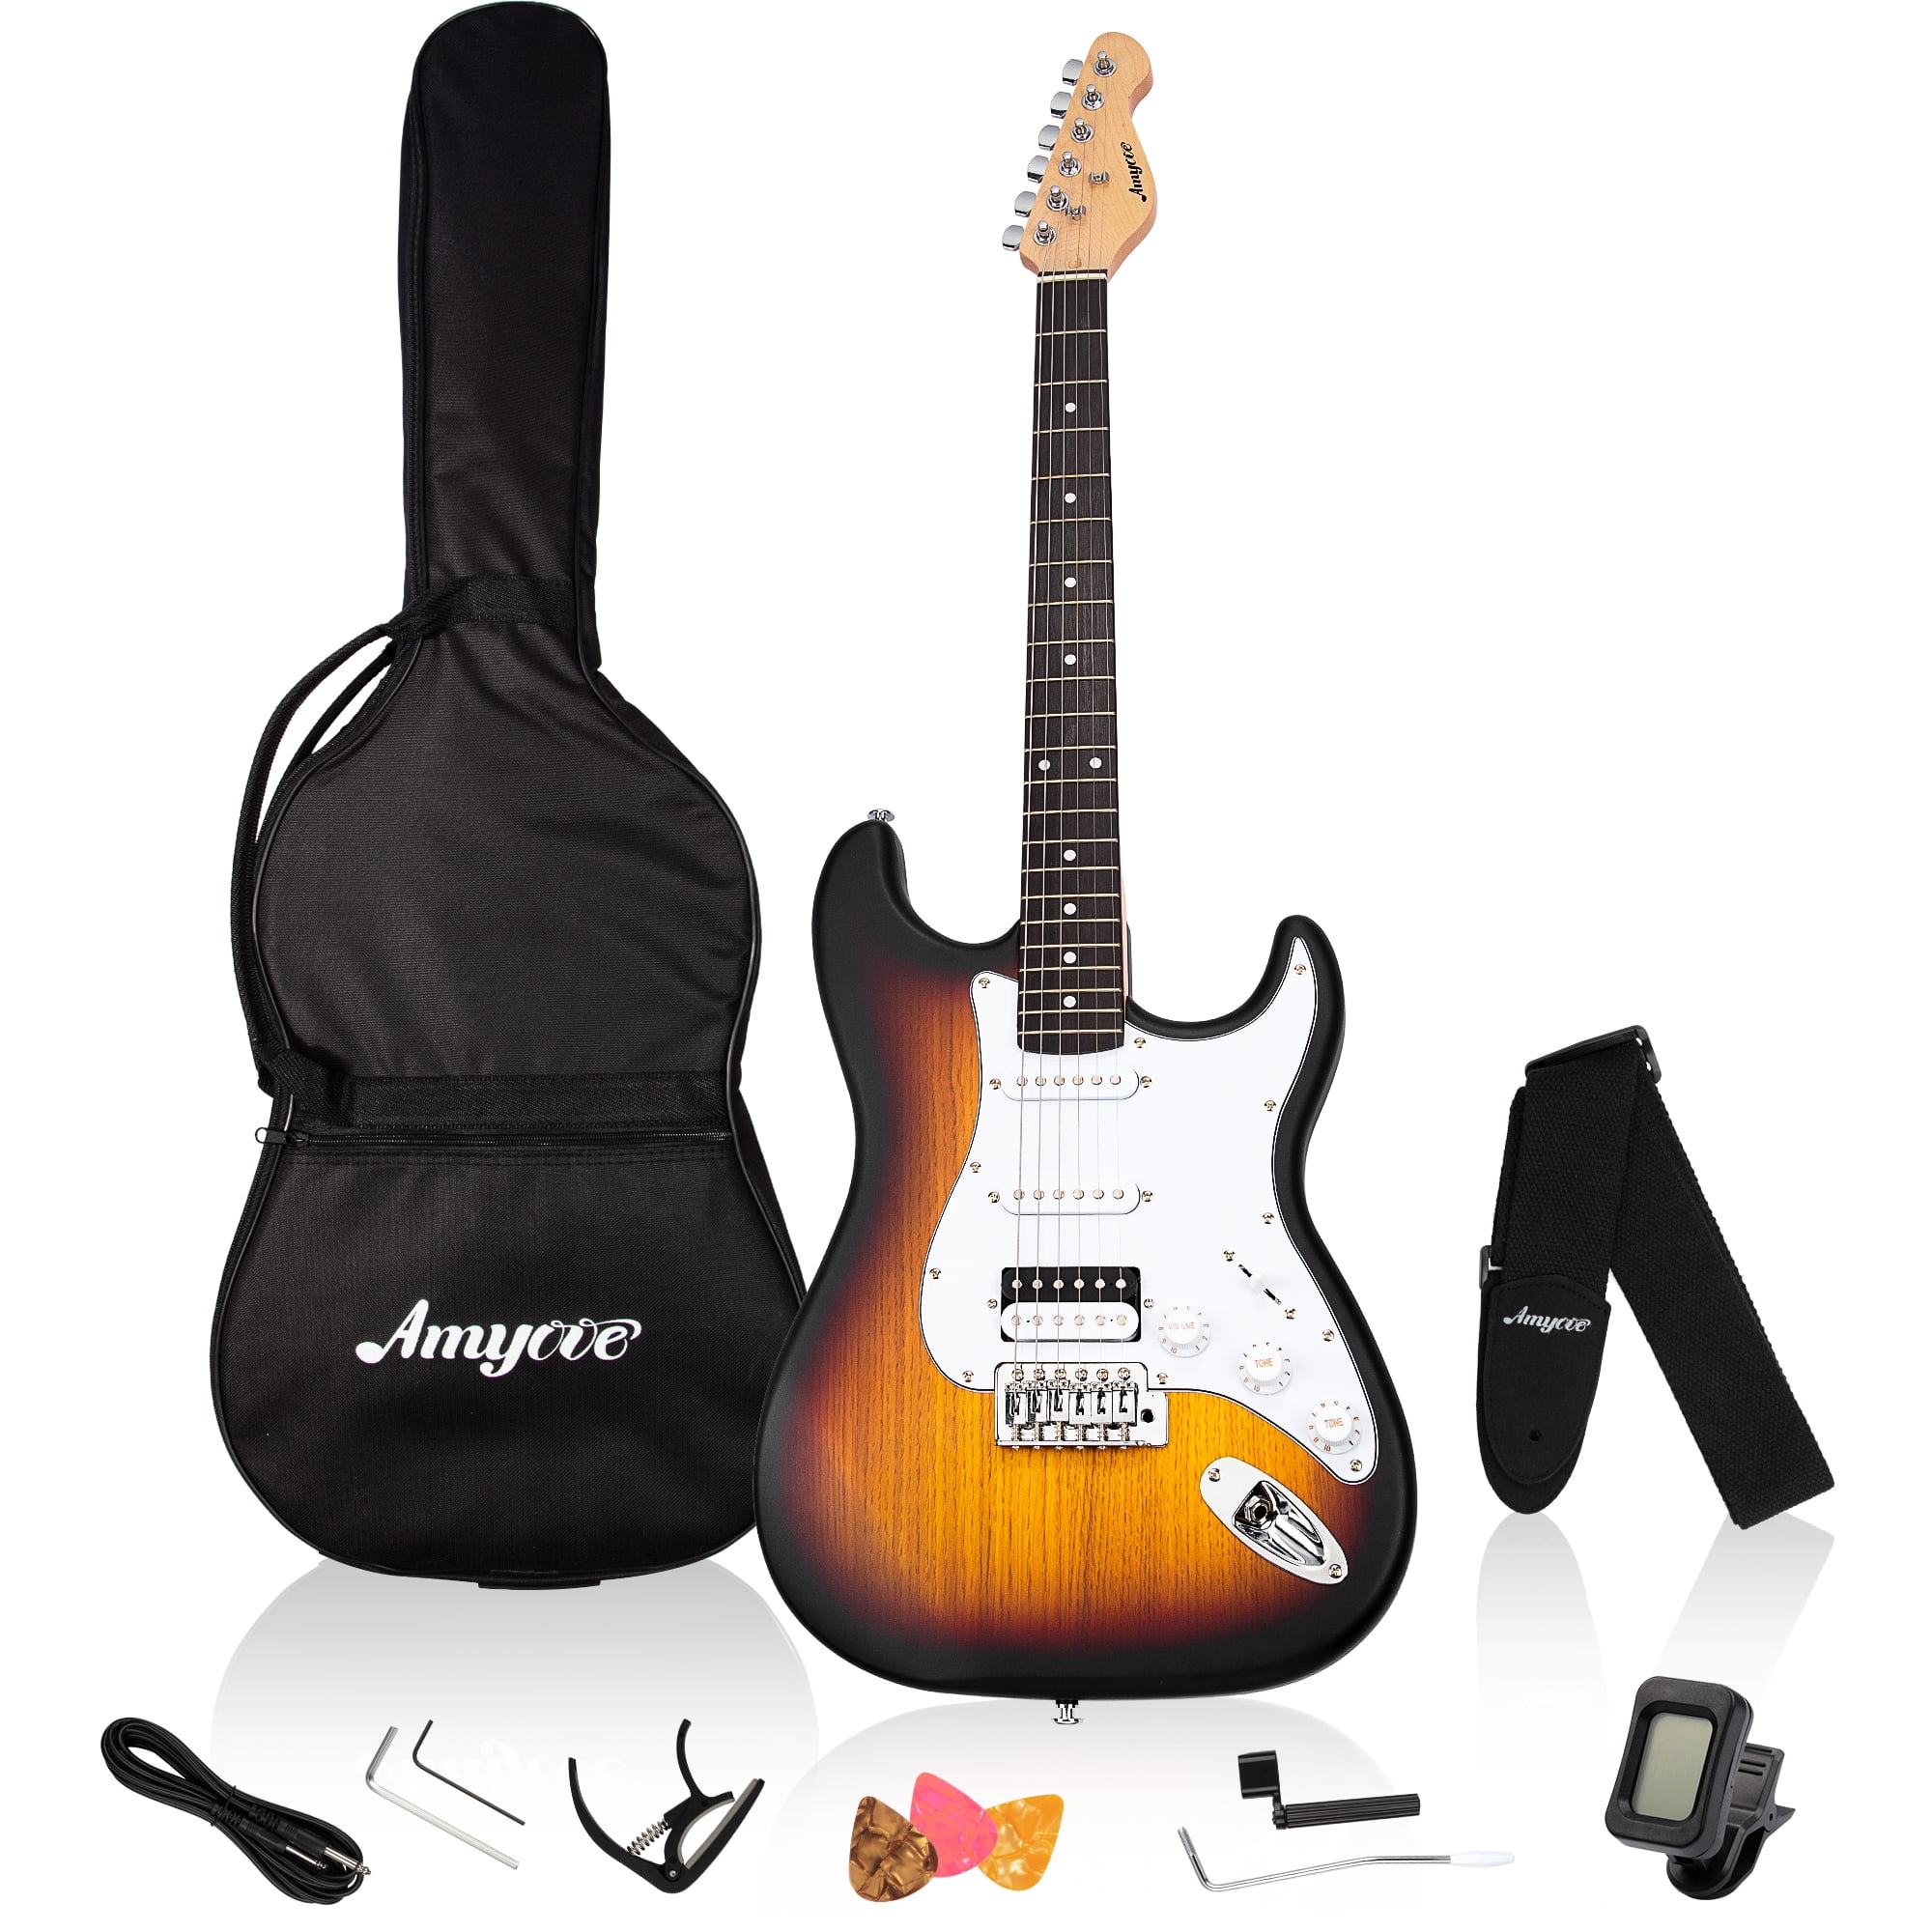 GlorySunshine Full Size 39 Inch Stratocaster Electric Guitar Kits for  Beginners, HSS Electric Guitar for Starters with Bag, Digital Tuner, Capo,  Strap, Cable, Picks(Black) - Walmart.com